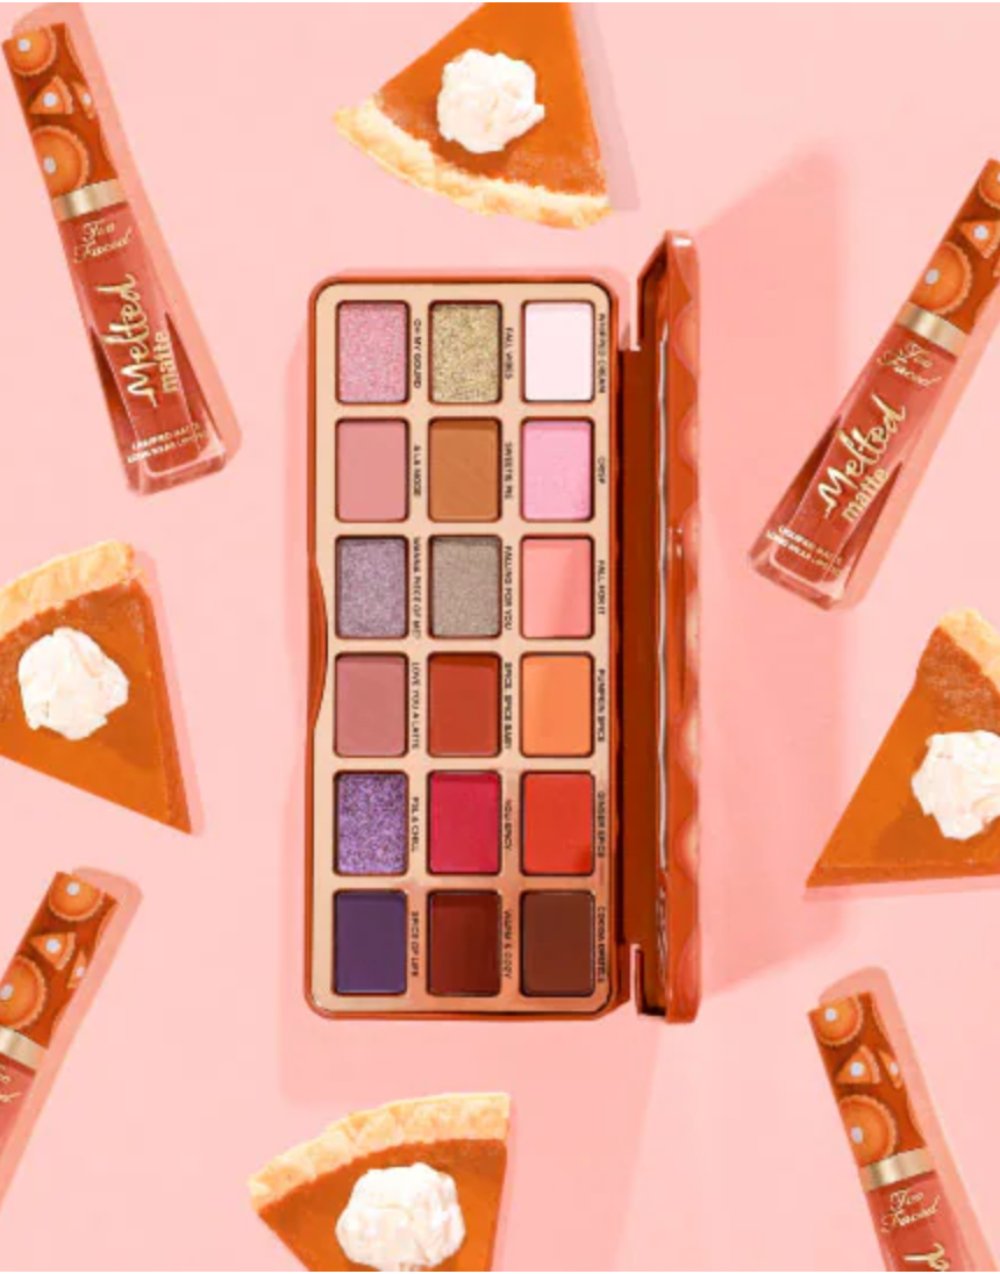 Too Faced Pumpkin Spice Eyeshadow Palette - The Face Method